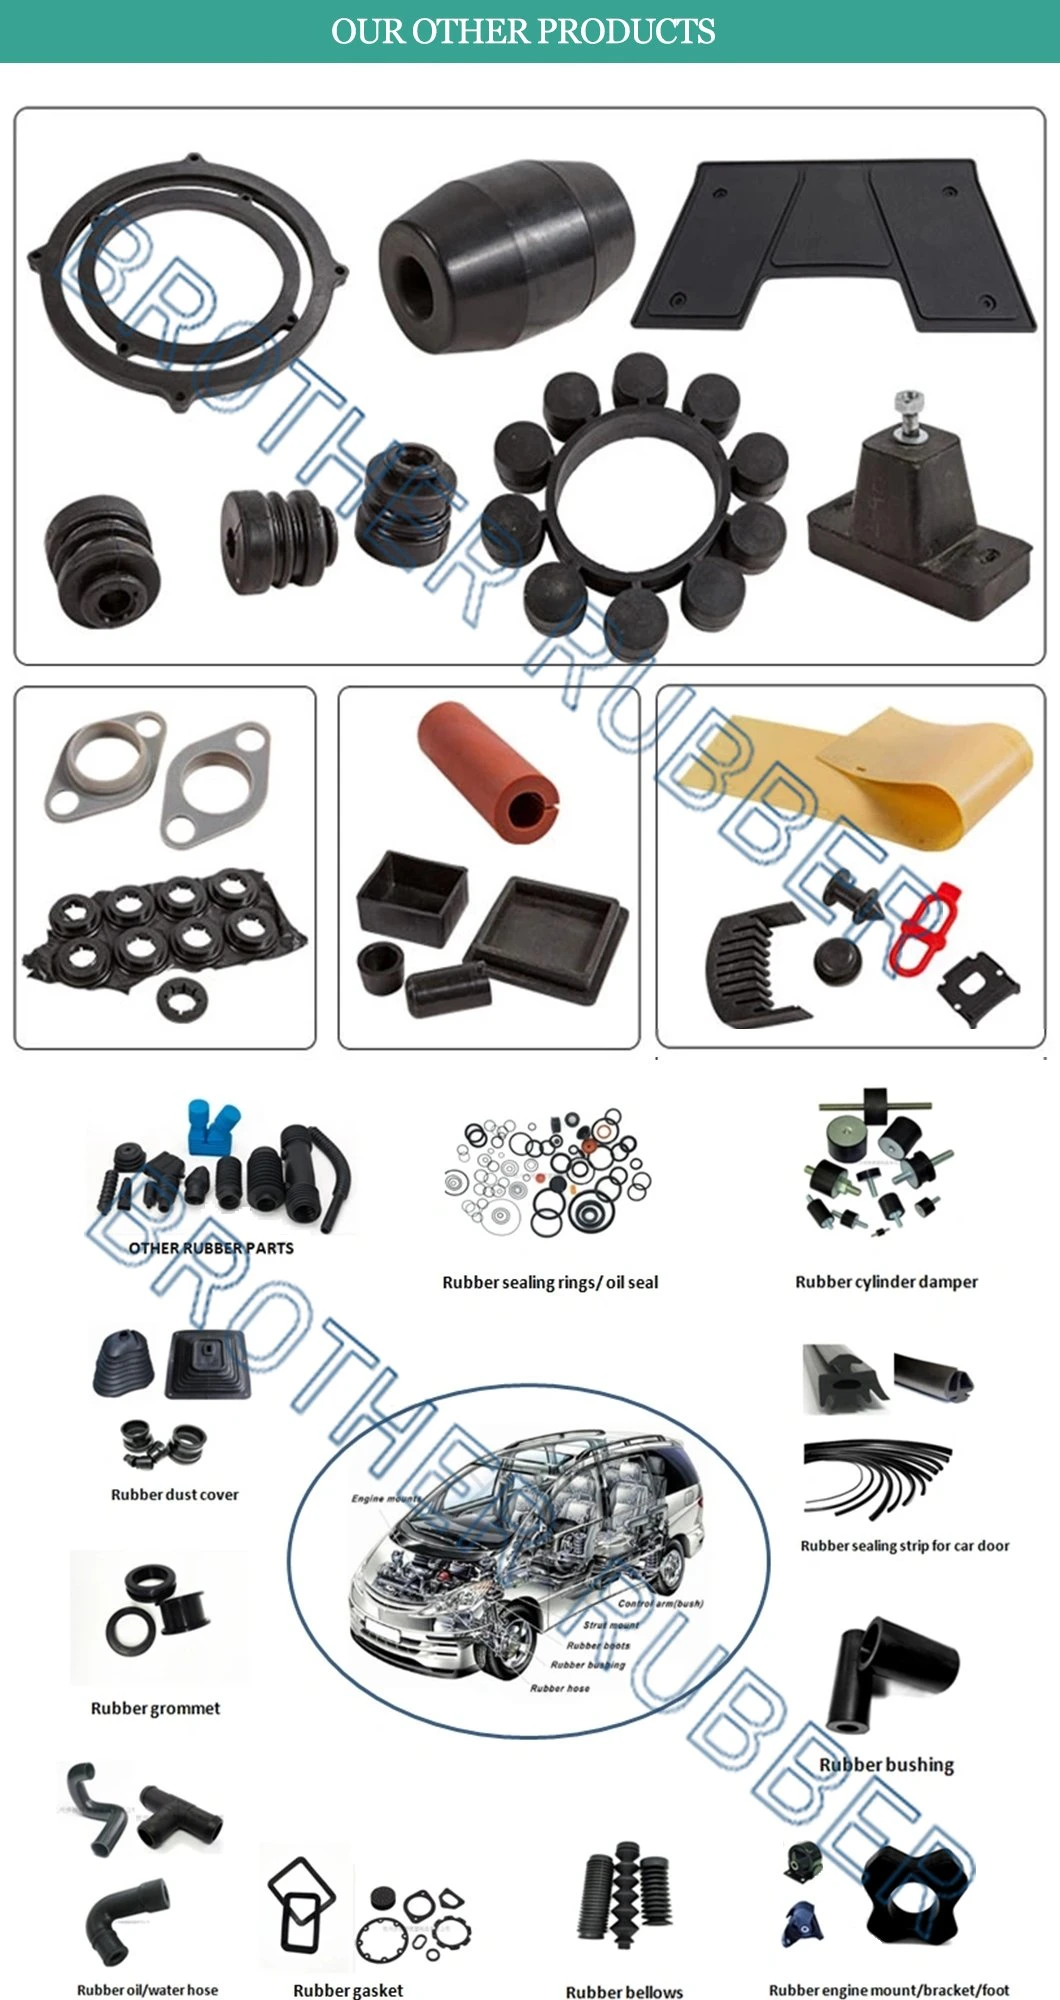 Chinese Supplier Wholesale Silicone Rubber Parts Rubber Bellows Rubber Parts